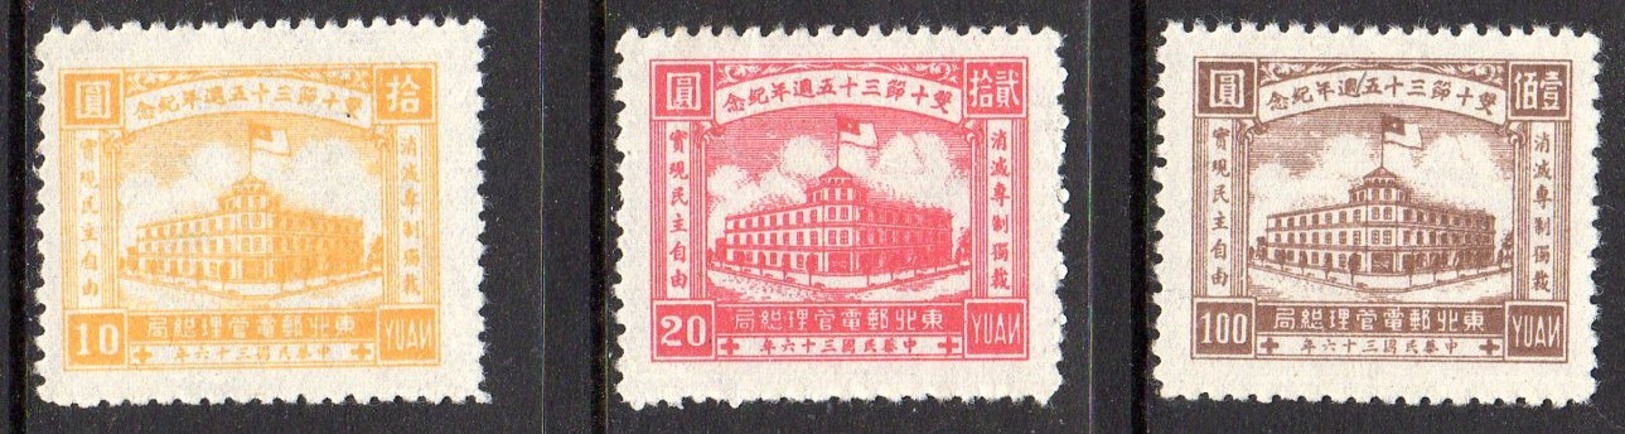 1947 Double Ten’ MNH Set Very Fine Yang NE93-5 Privately Barely Offered Anymore &  CERTIFICATE (NE-29) - North-Eastern 1946-48